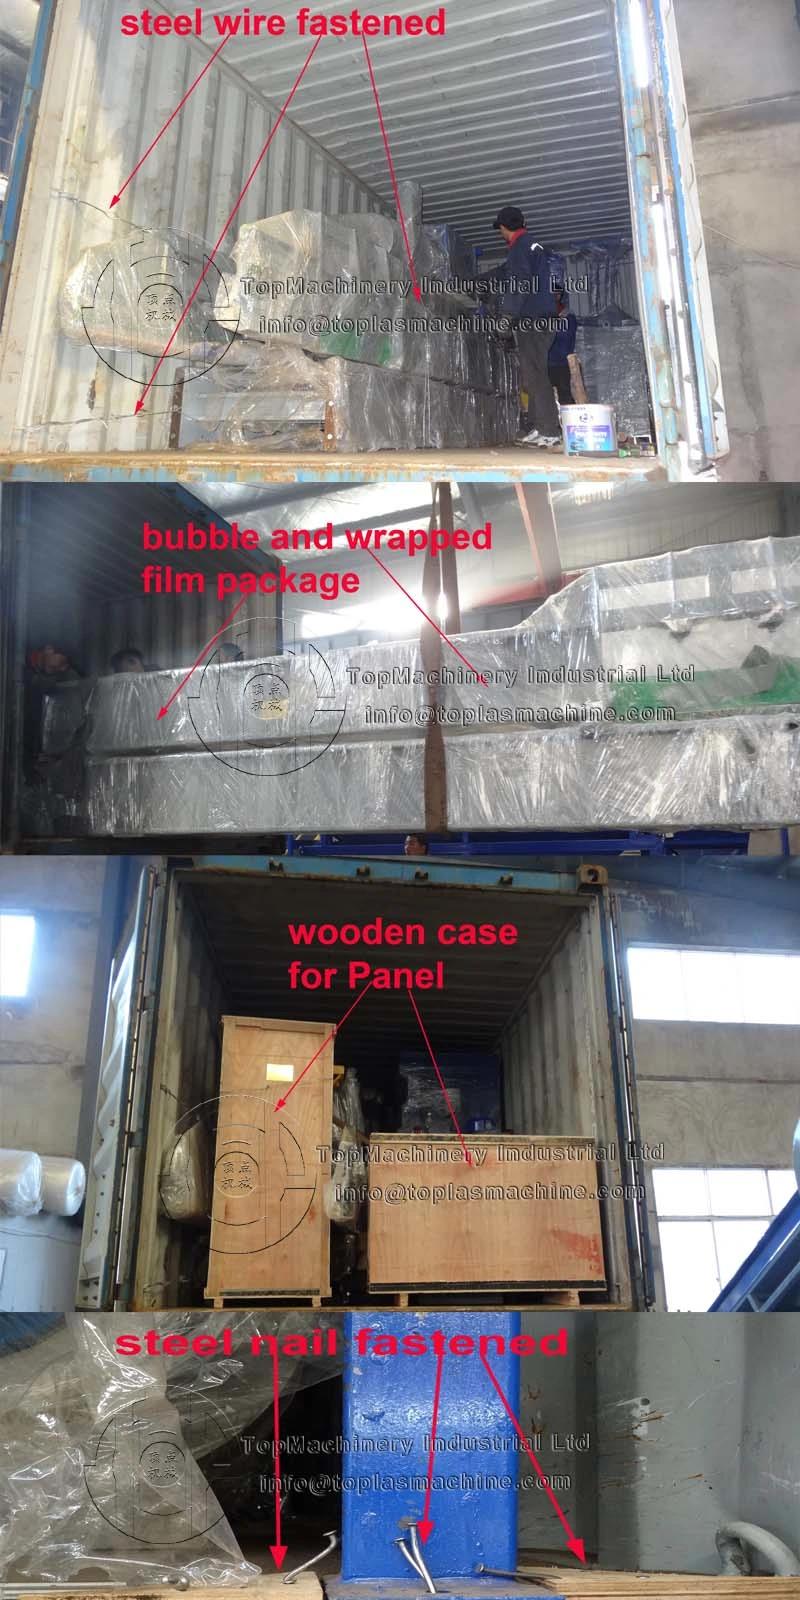 EPE EPS Epx XPS EPP HIPS PUR EVA Recycling Units Cold Extruder Styrofoam Pressor